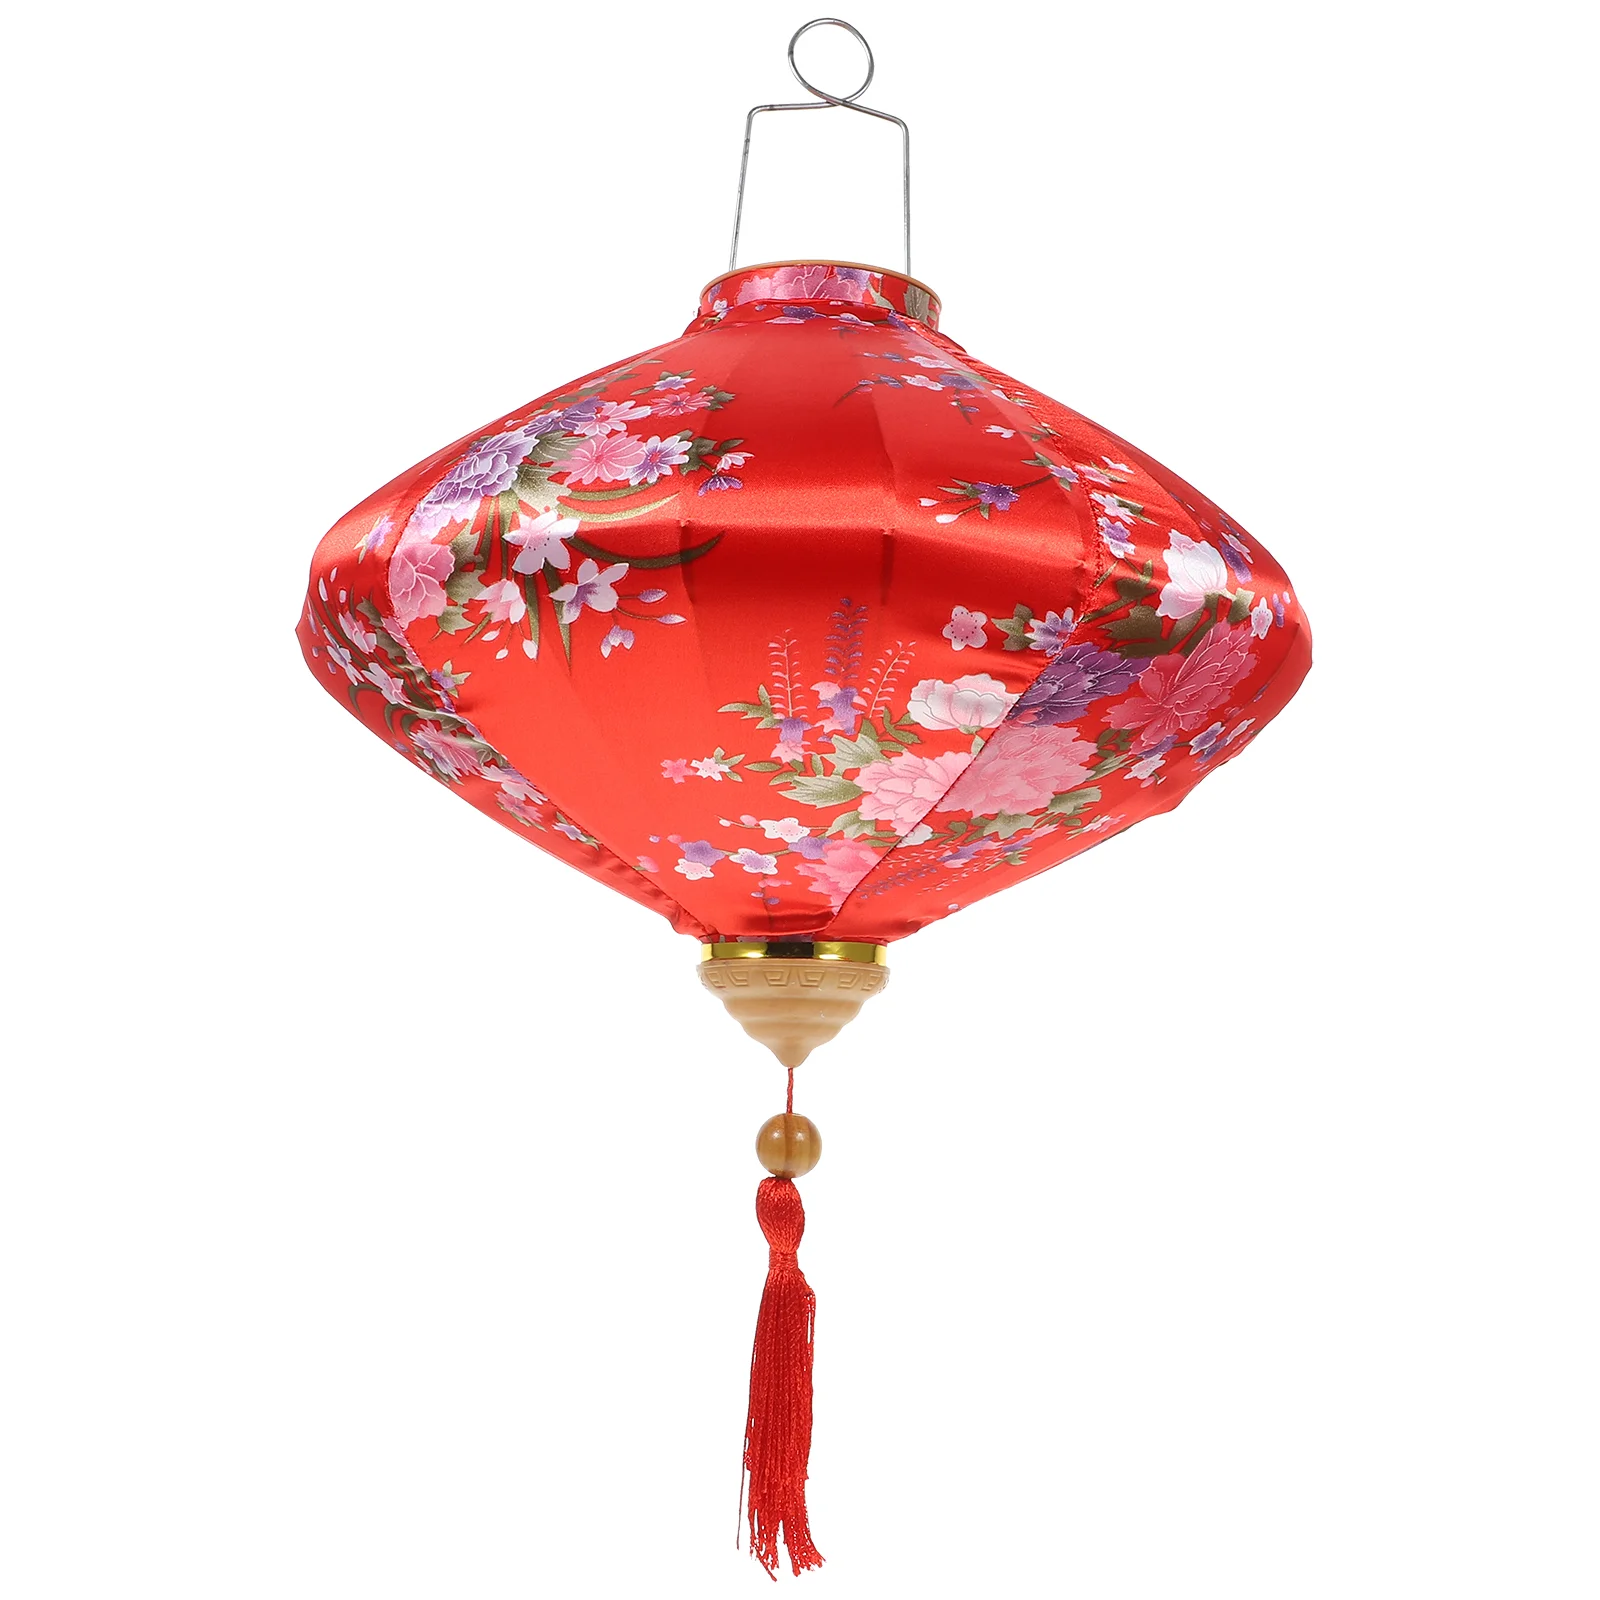 Vietnamese Silk Lantern Red Chinese Lantern Japanese Flowers Lanterns Oriental Style Traditional Decoration New Year Wedding wedding corsages and boutonnieres for men groom silk rose boutonniere buttonhole artificial flowers bouquet corsages brooch pins